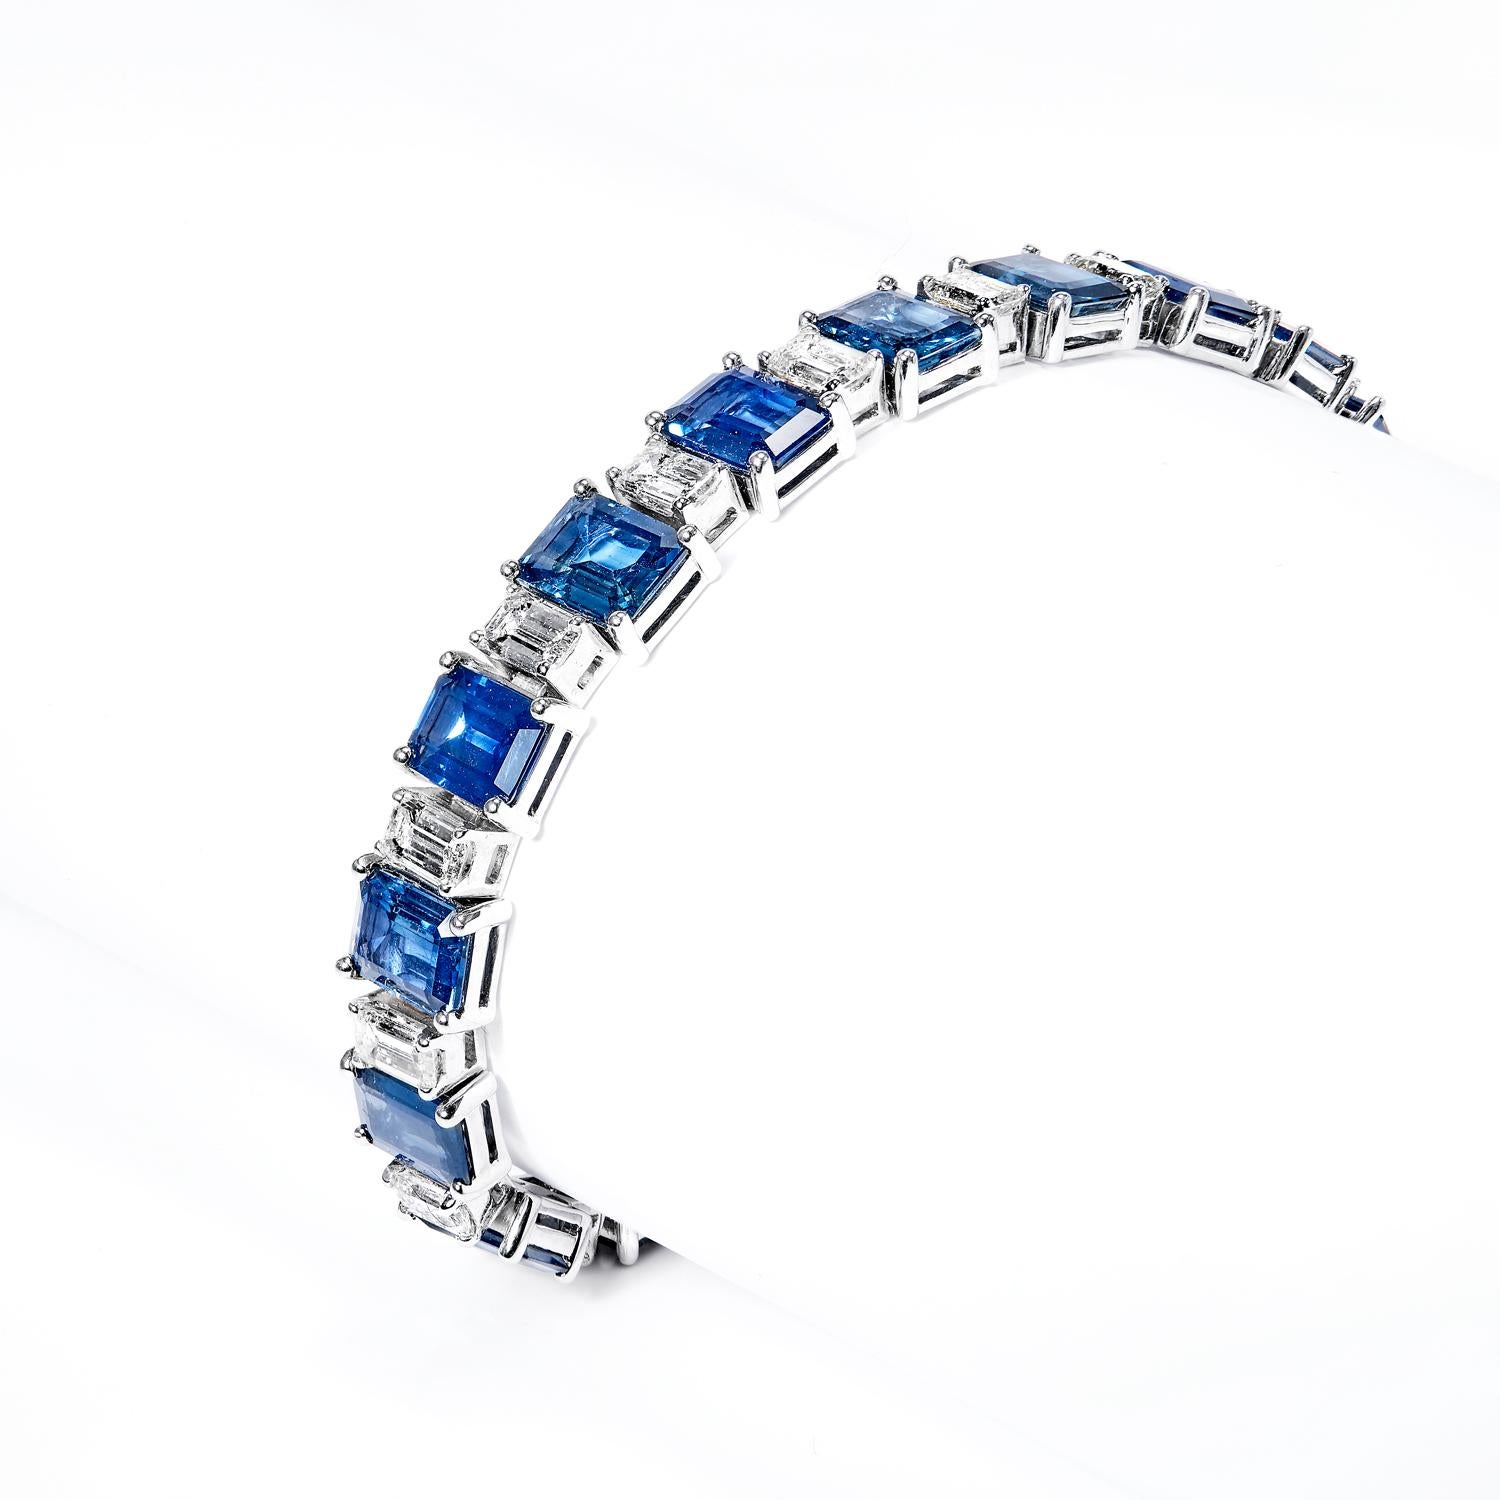 28 Carat Emerald Cut Sapphire and Diamond Single Row Bracelet Certified B In New Condition For Sale In New York, NY